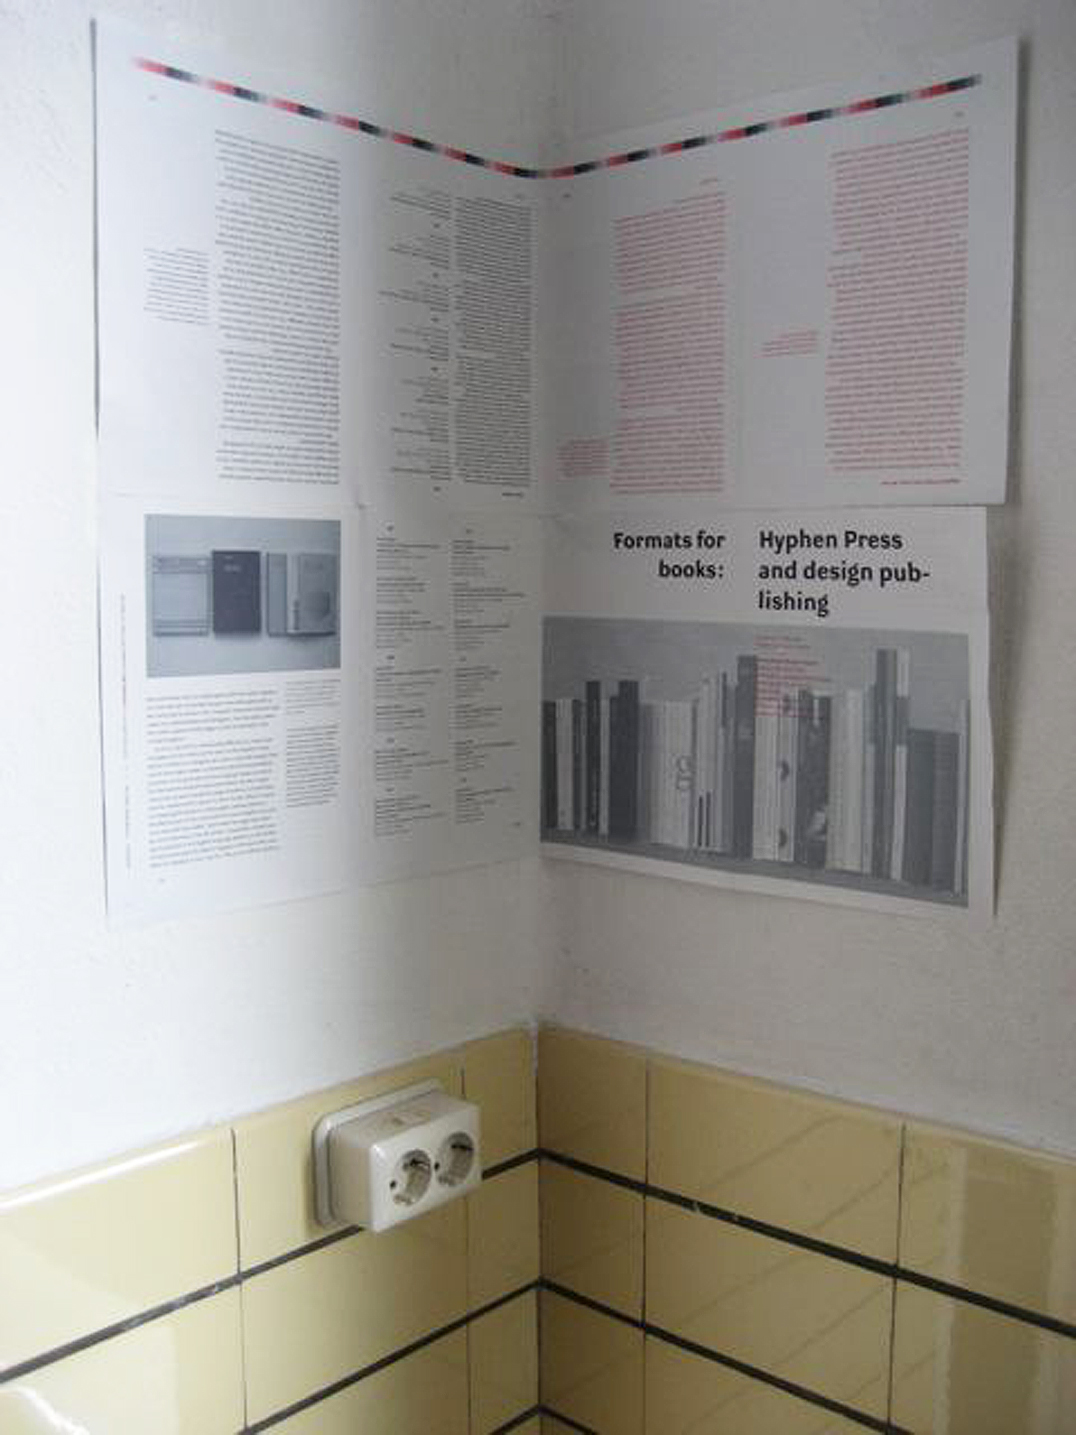 Exhibition pamphlet posted